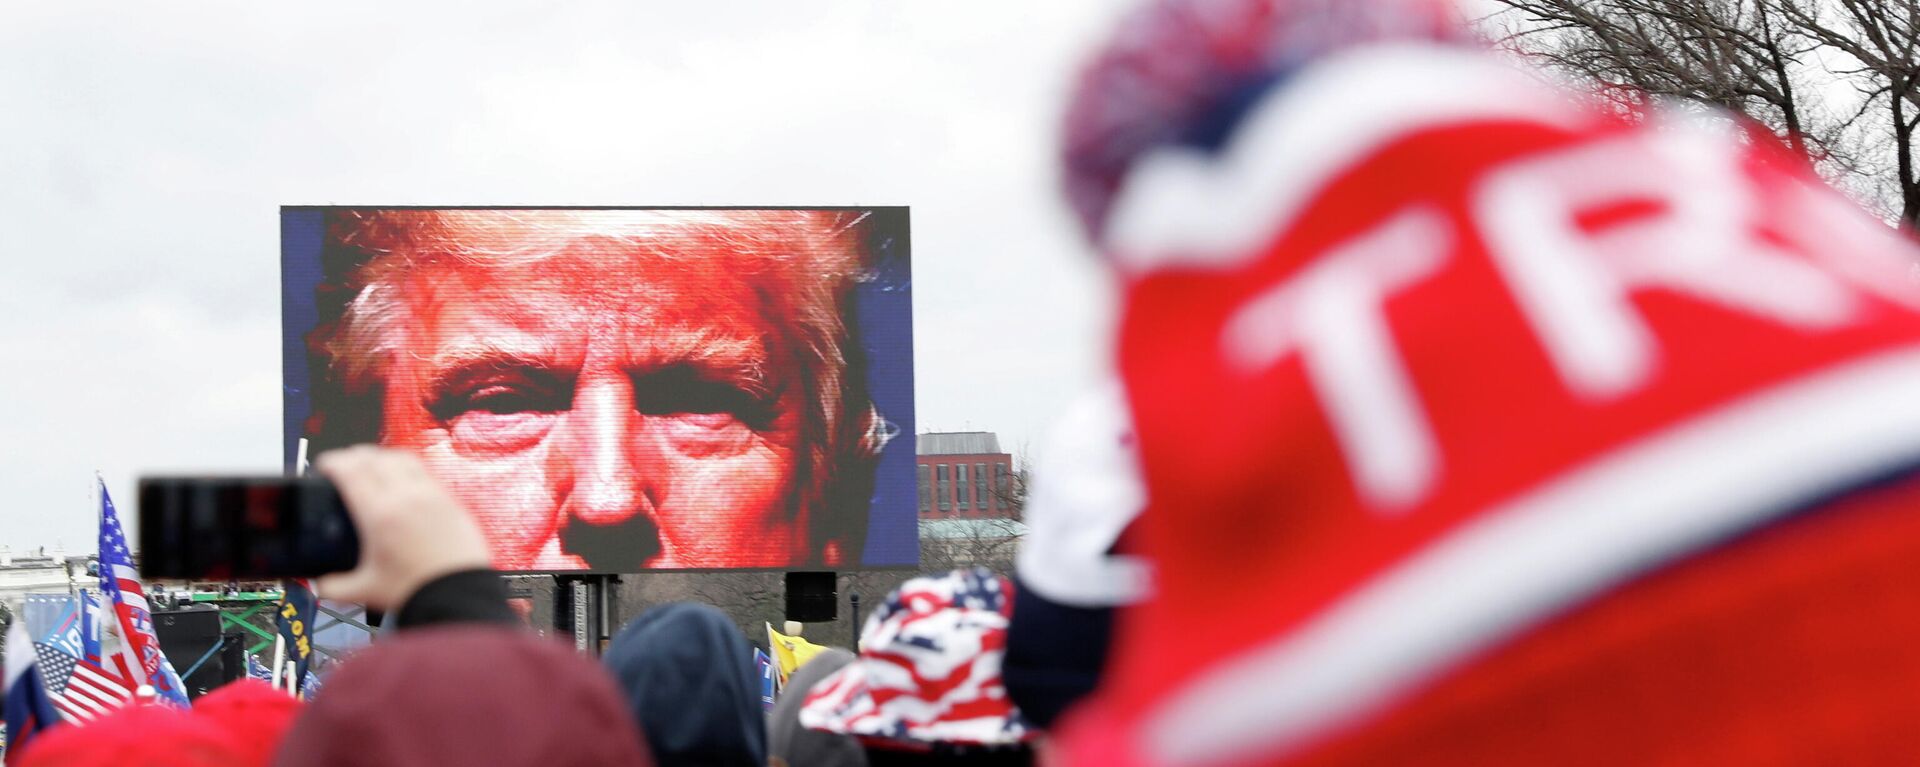 U.S. President Donald Trump is seen on a screen speaking to supporters during a rally to contest the certification of the 2020 U.S. presidential election results by the U.S. Congress, in Washington, U.S, January 6, 2021. Picture taken January 6, 2021. REUTERS/Shannon Stapleton/File Photo/File Photo - Sputnik International, 1920, 19.10.2021